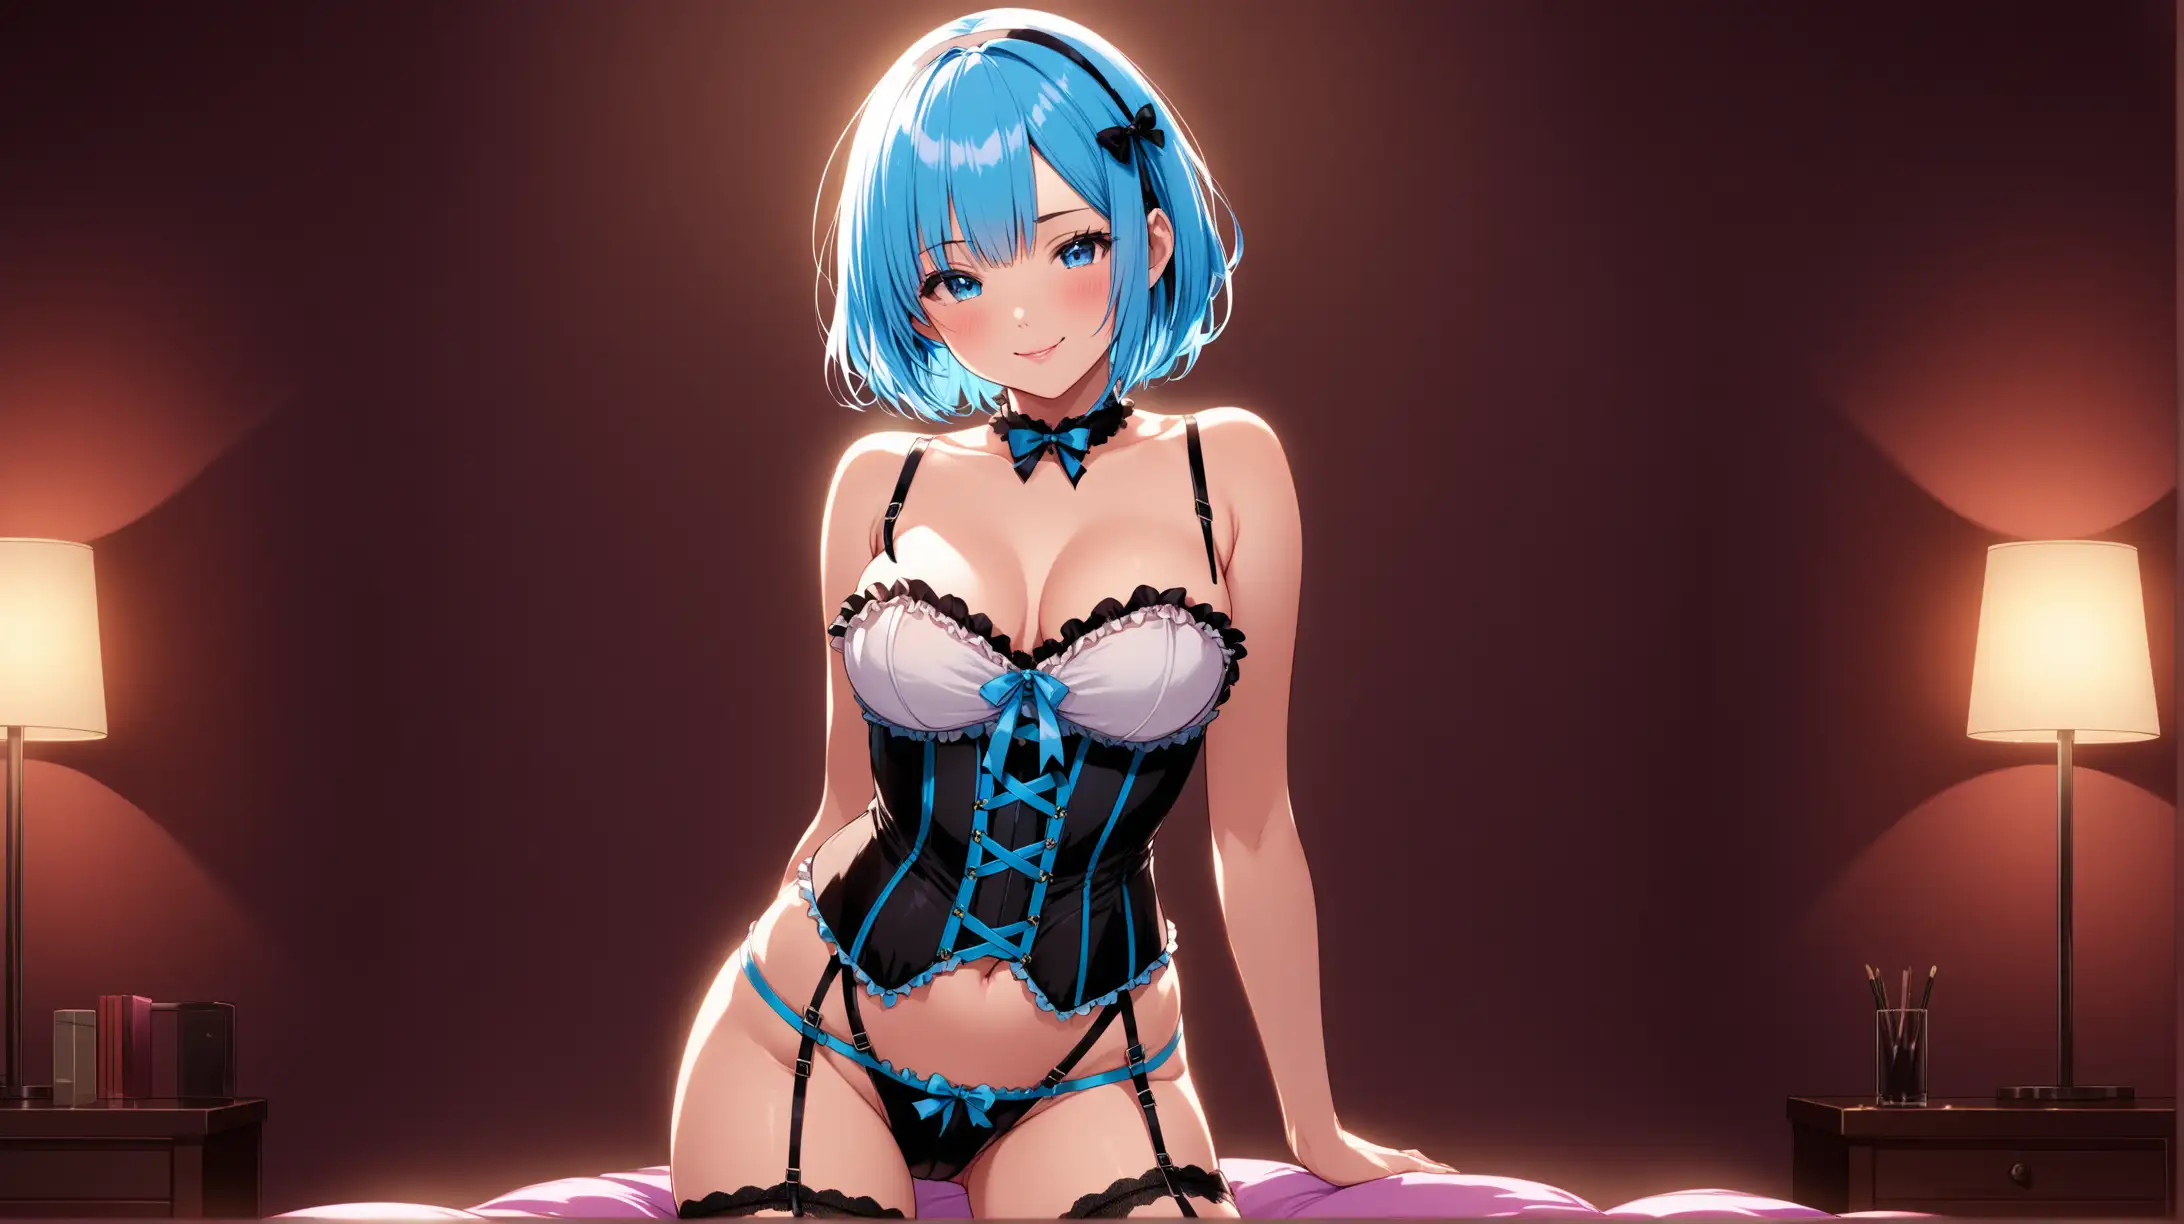 Sensual Rem in Colorful Corset and Garter Straps Poses Seductively